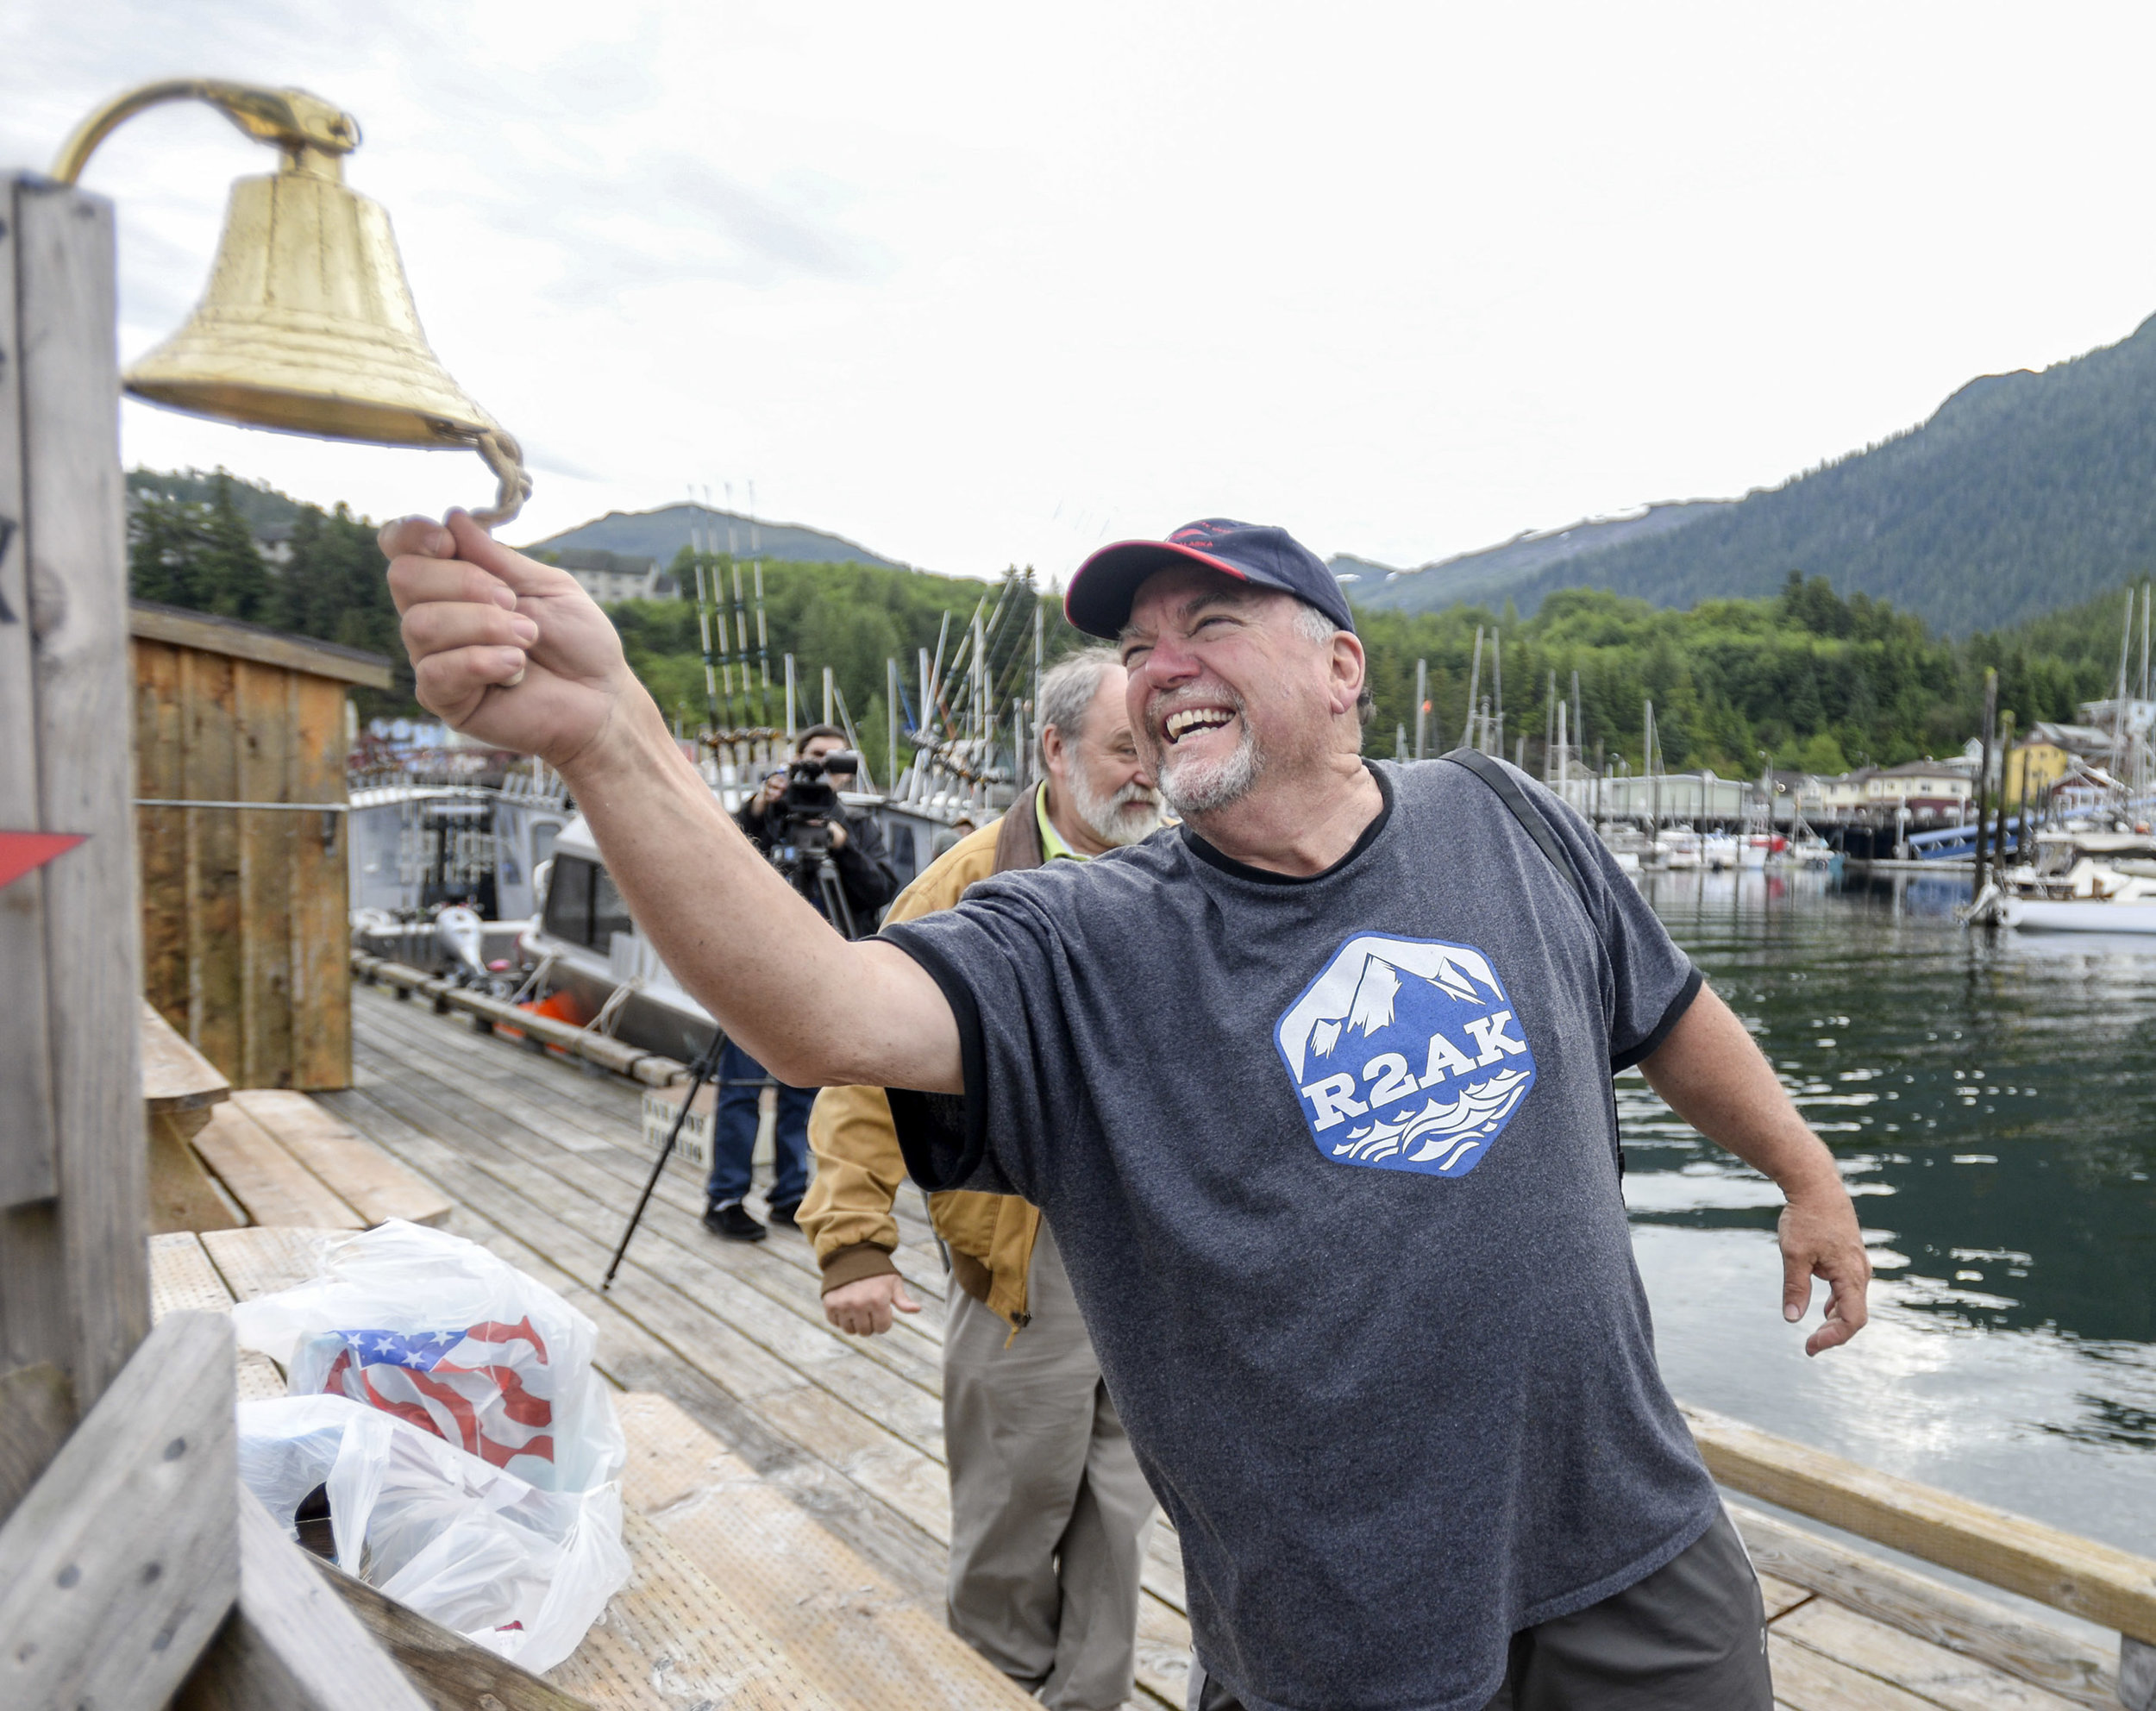  Team Ketchikan captain Charlie Starr laughs and smiles as he rings a ceremonial bell signifying his team's completion of the Race to Alaska on Thursday, July 7, 2016, at the Baranof Fishing docks in Thomas Basin. ©Ketchikan Daily News 